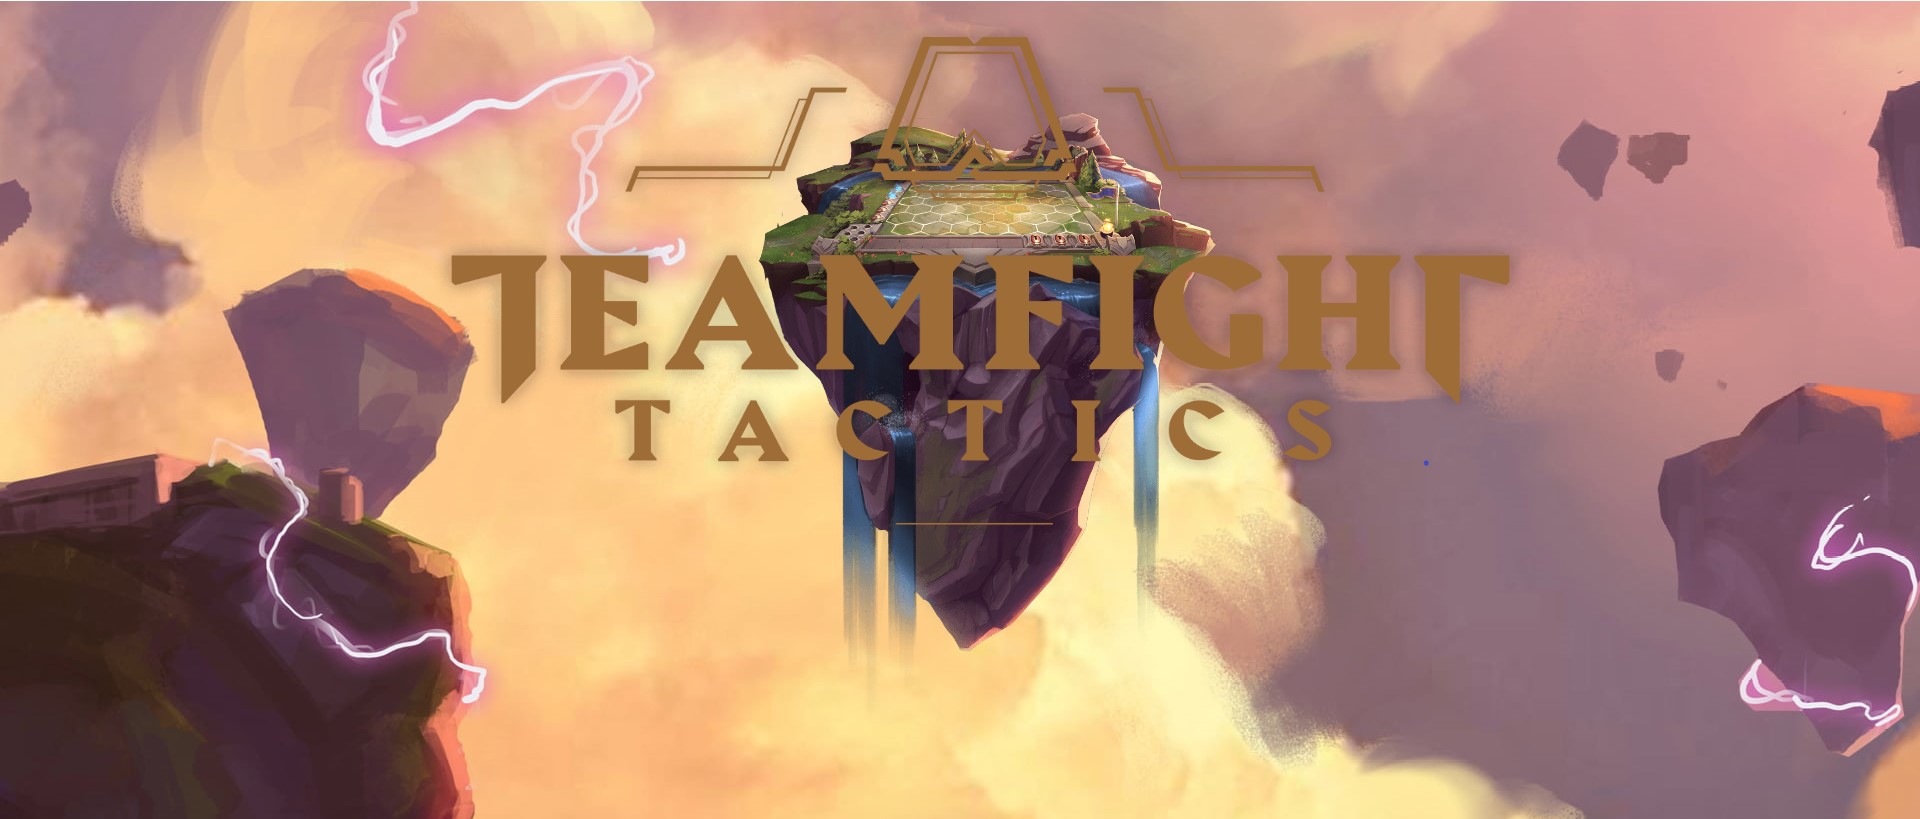 Download & Play Teamfight Tactics on PC & Mac with NoxPlayer (Emulator)